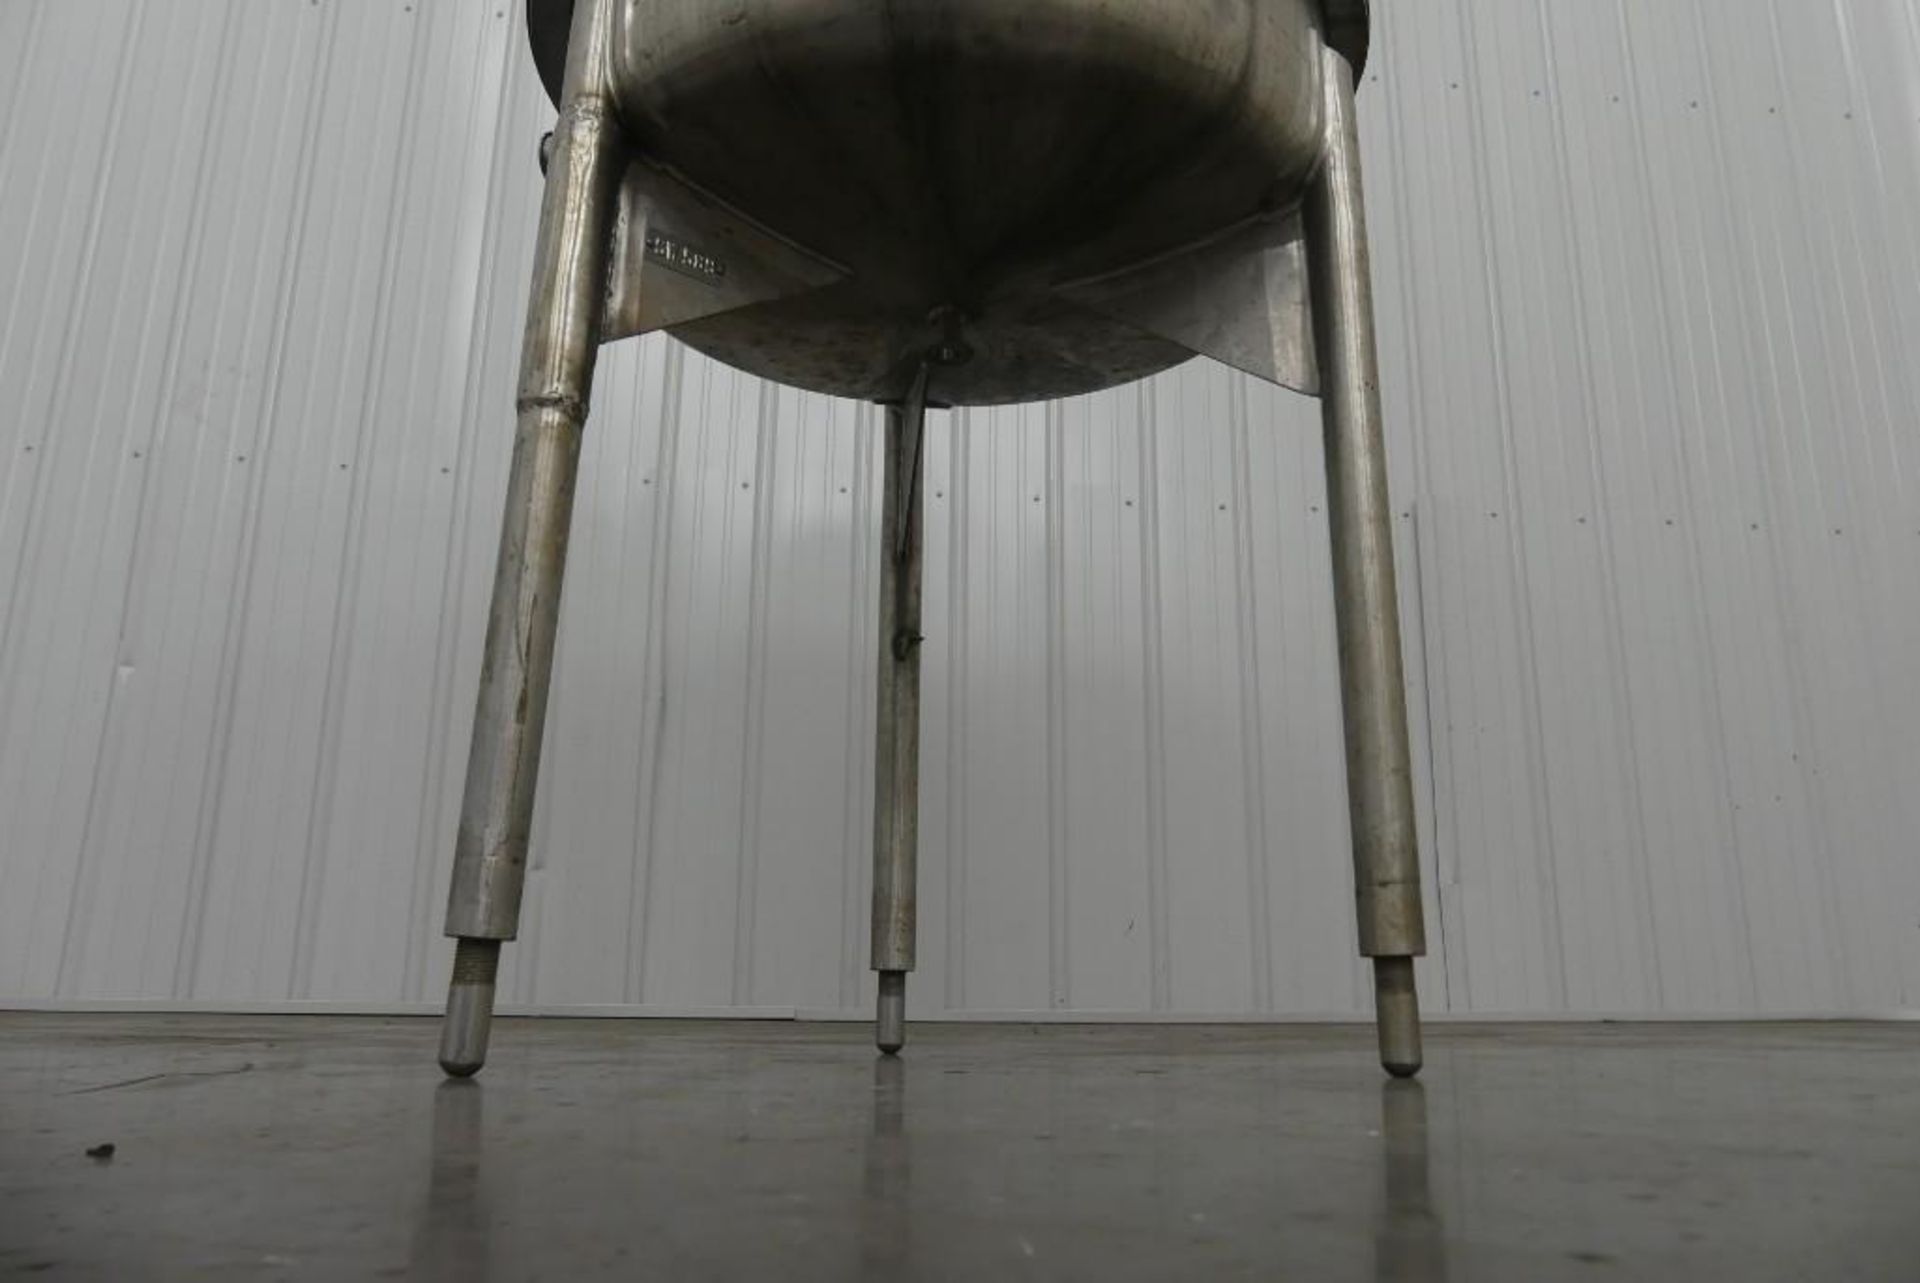 Paul Mueller SS 75 Gallon Jacketed Tank - Image 7 of 9